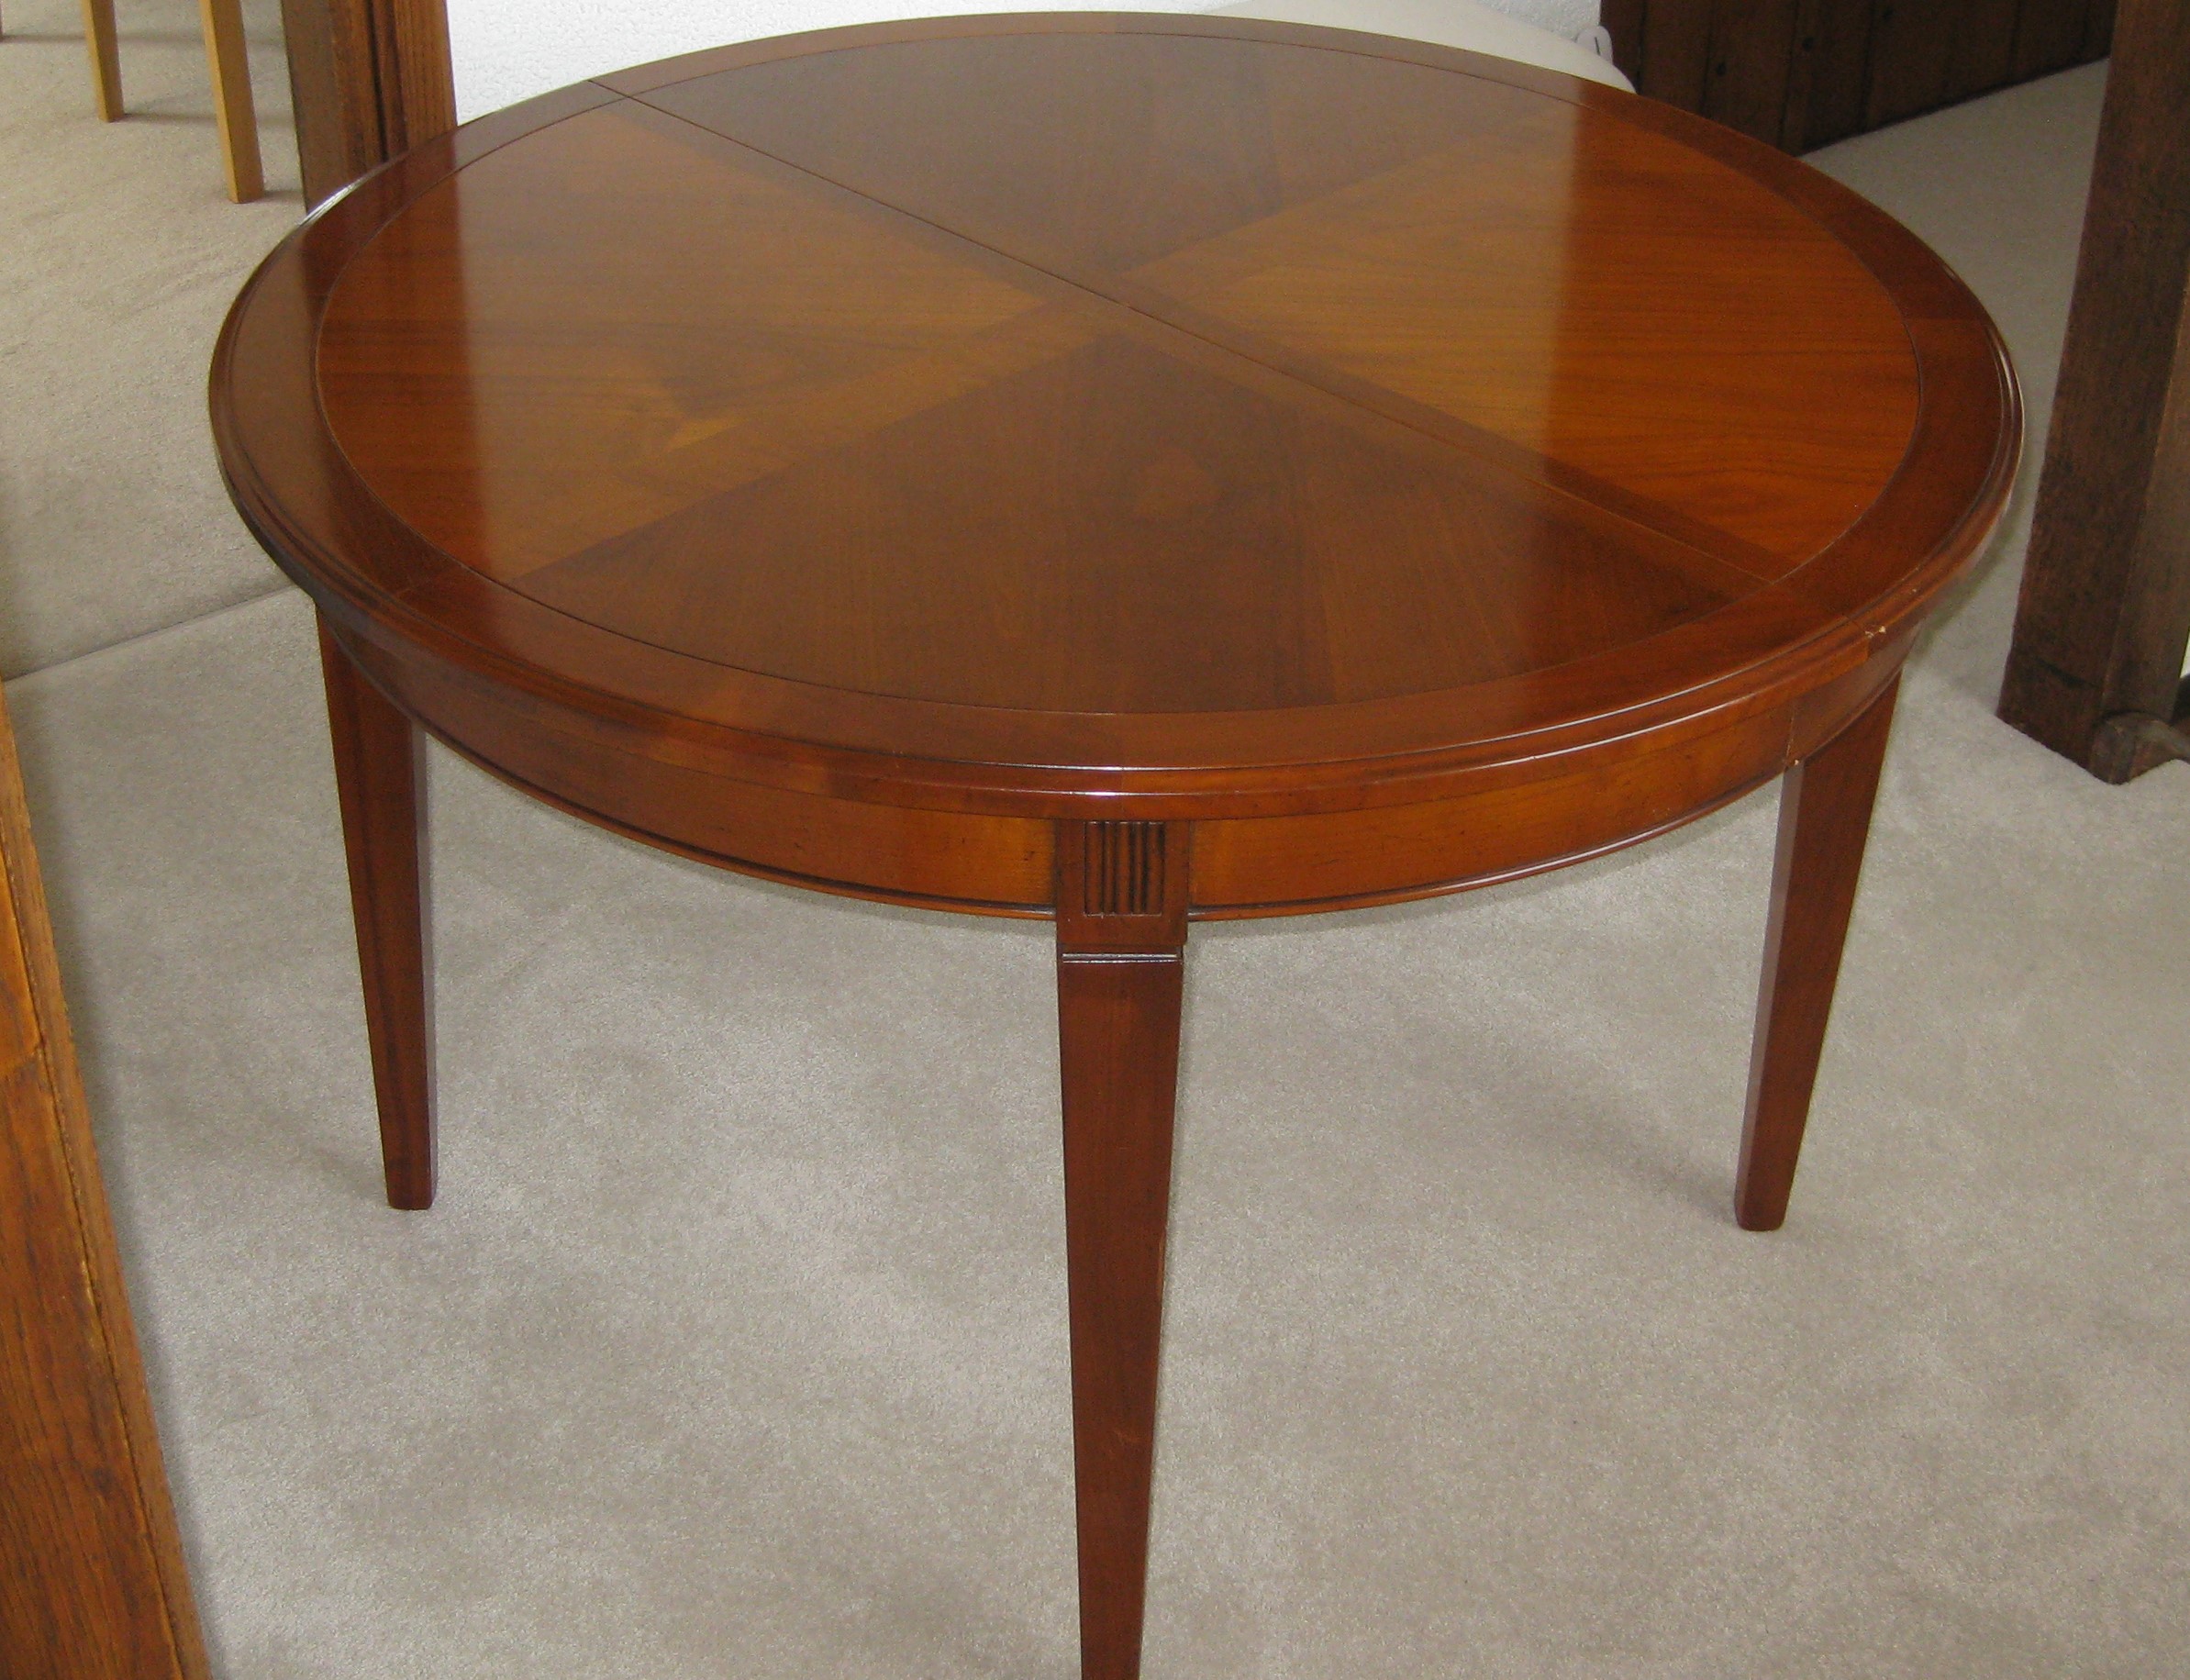 Cherry Wood Cherry Color Dining Room Table